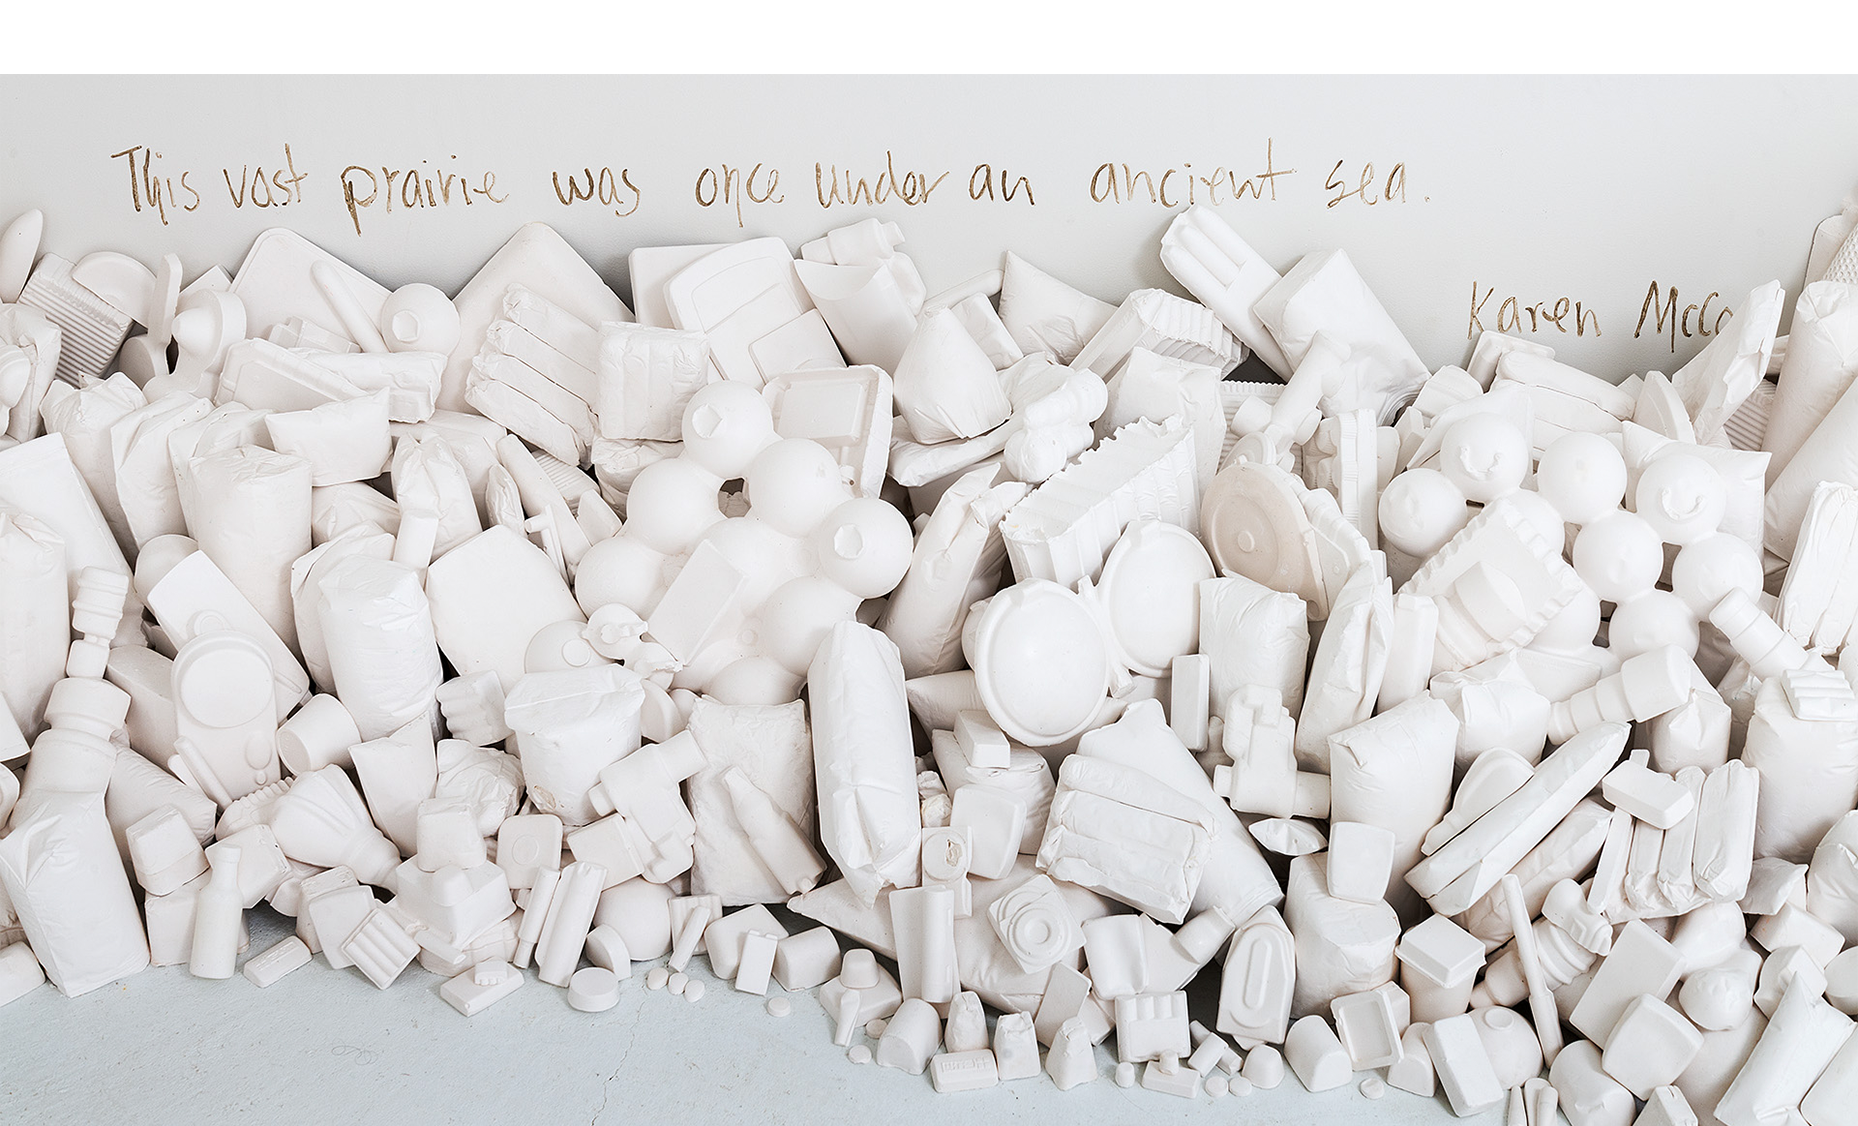  Installation detail of consumer goods casts “washed up” against the walls with text. 